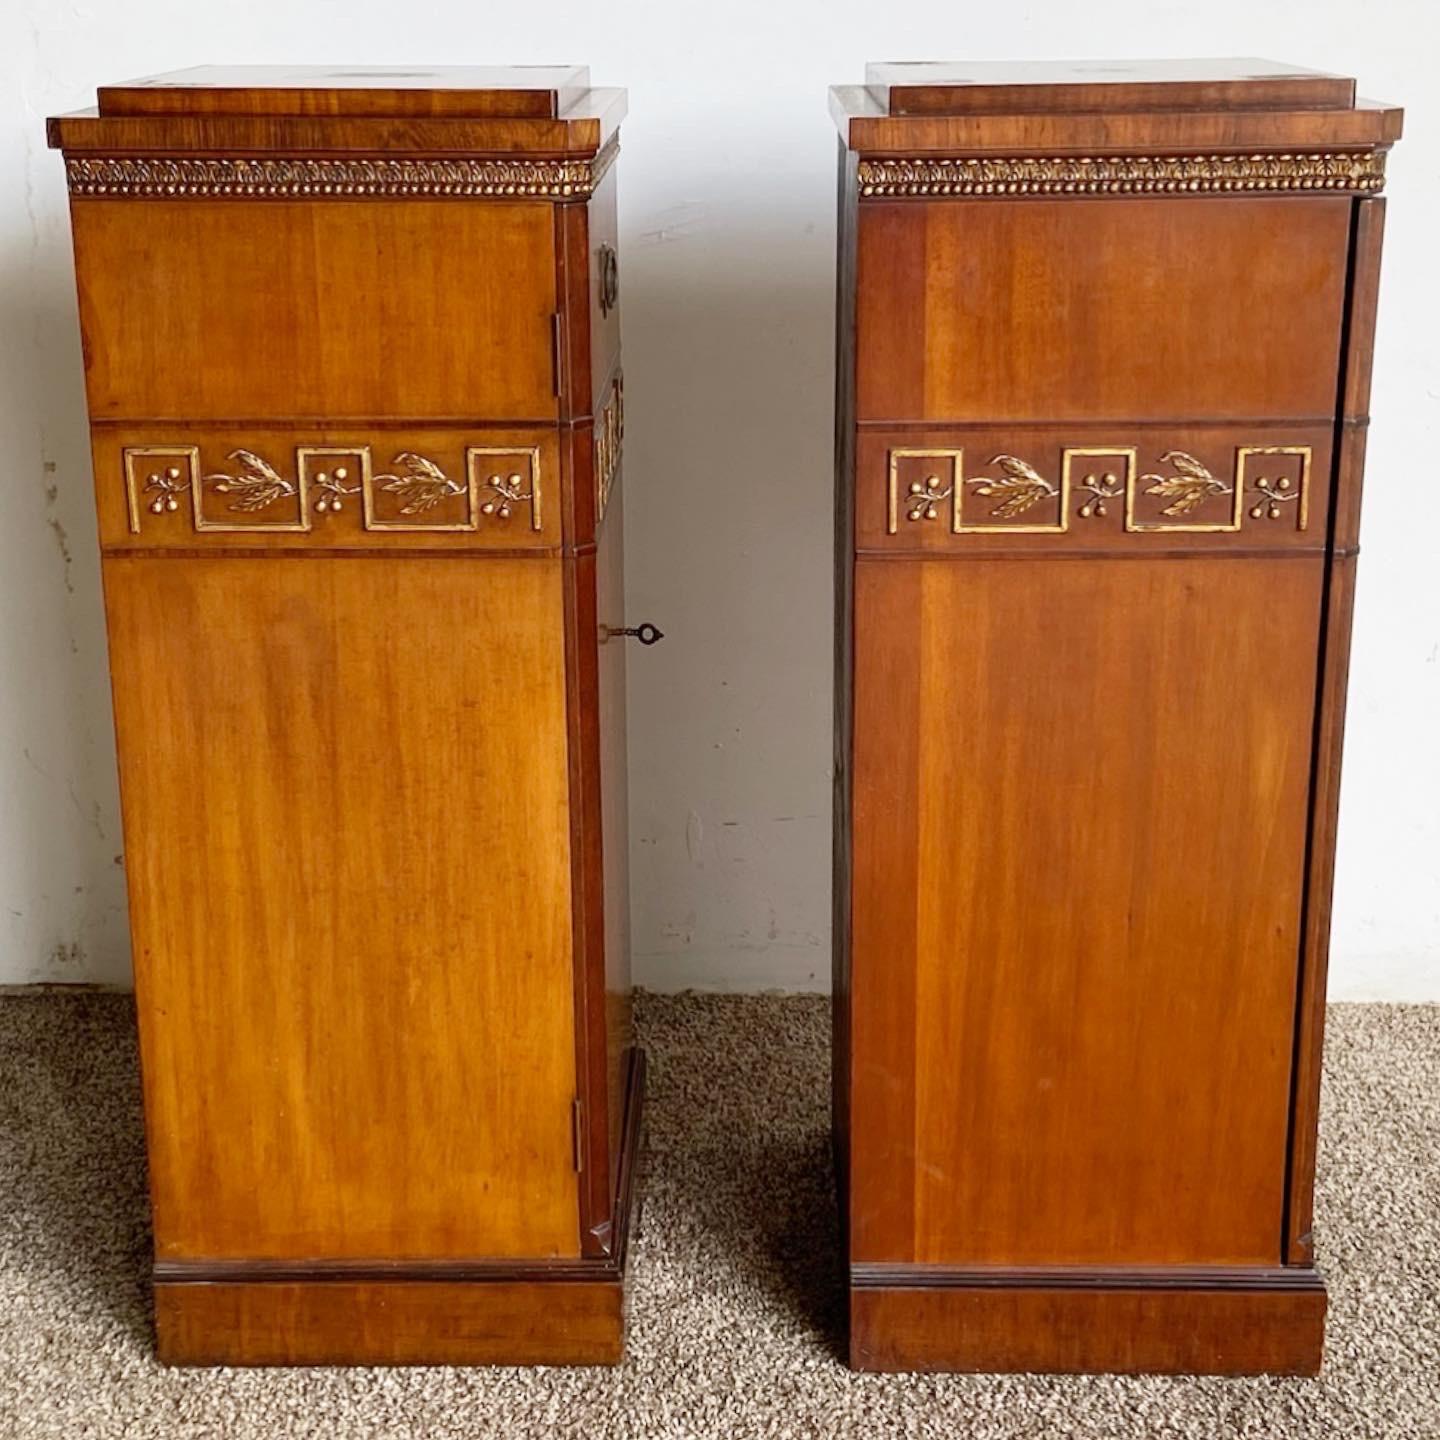 Exceptional antique pair of art deco pedestal cabinets. Features burlwood and walnut with gilded accents across the side with three little drawers inside each door. Was acquired with two pieces of marble for the top which we do not believe were from